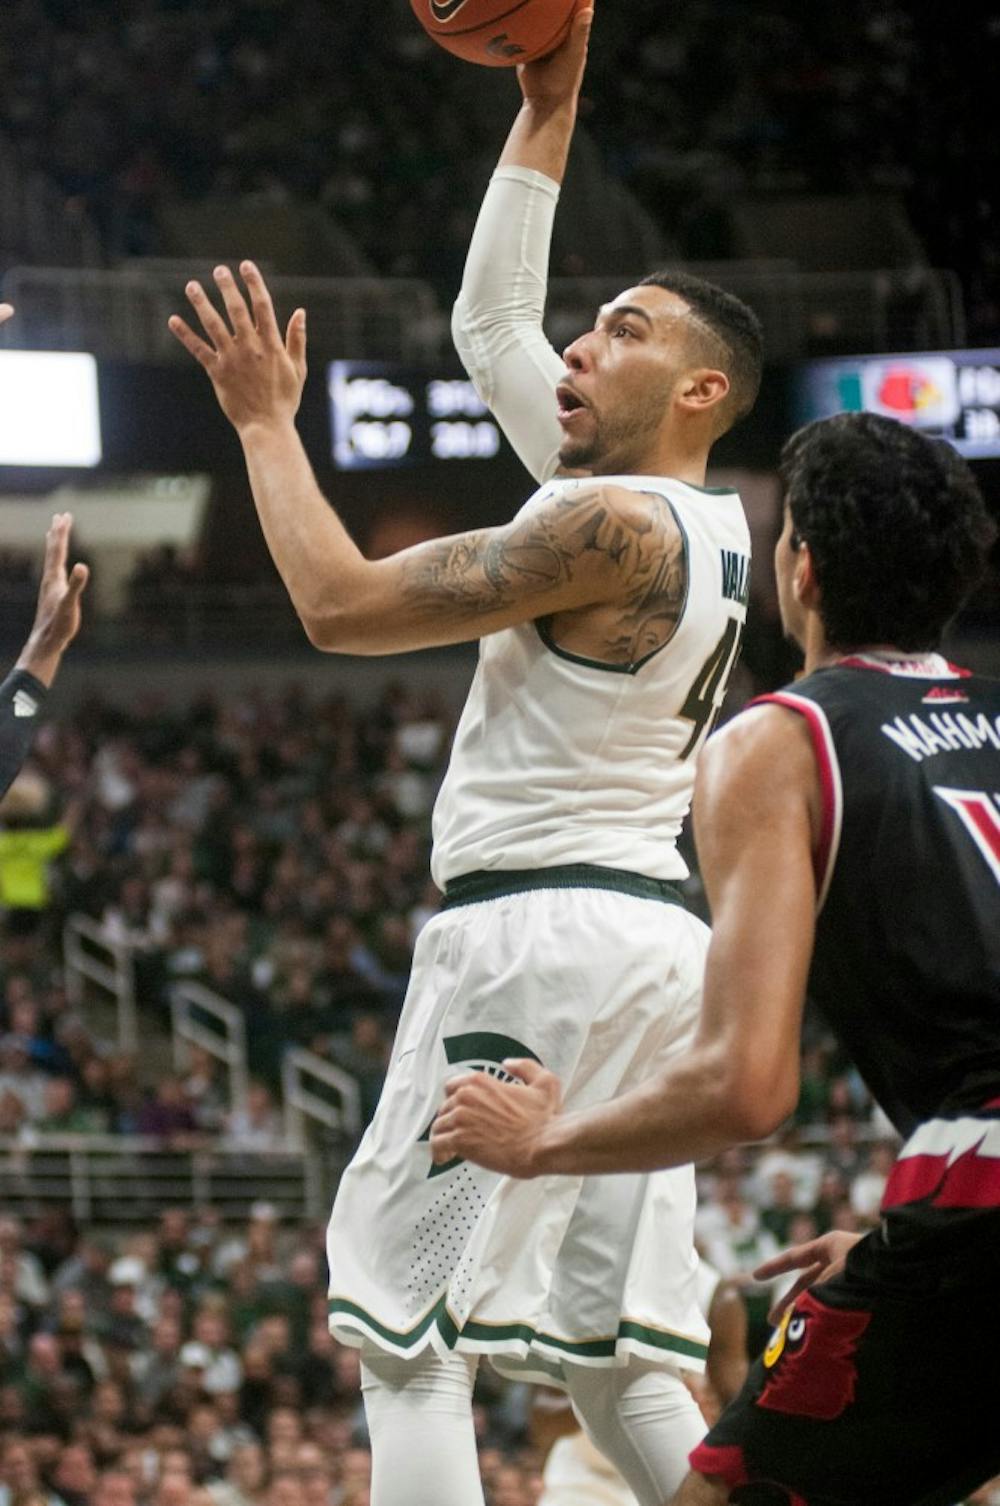 Senior guard Denzel Valentine, 45, shoots during the first half of the basketball game against the University of Louisville on Dec. 2, 2015 at the Breslin Center in East Lansing, MI. The Spartans defeated the Cardinals, 71-67.